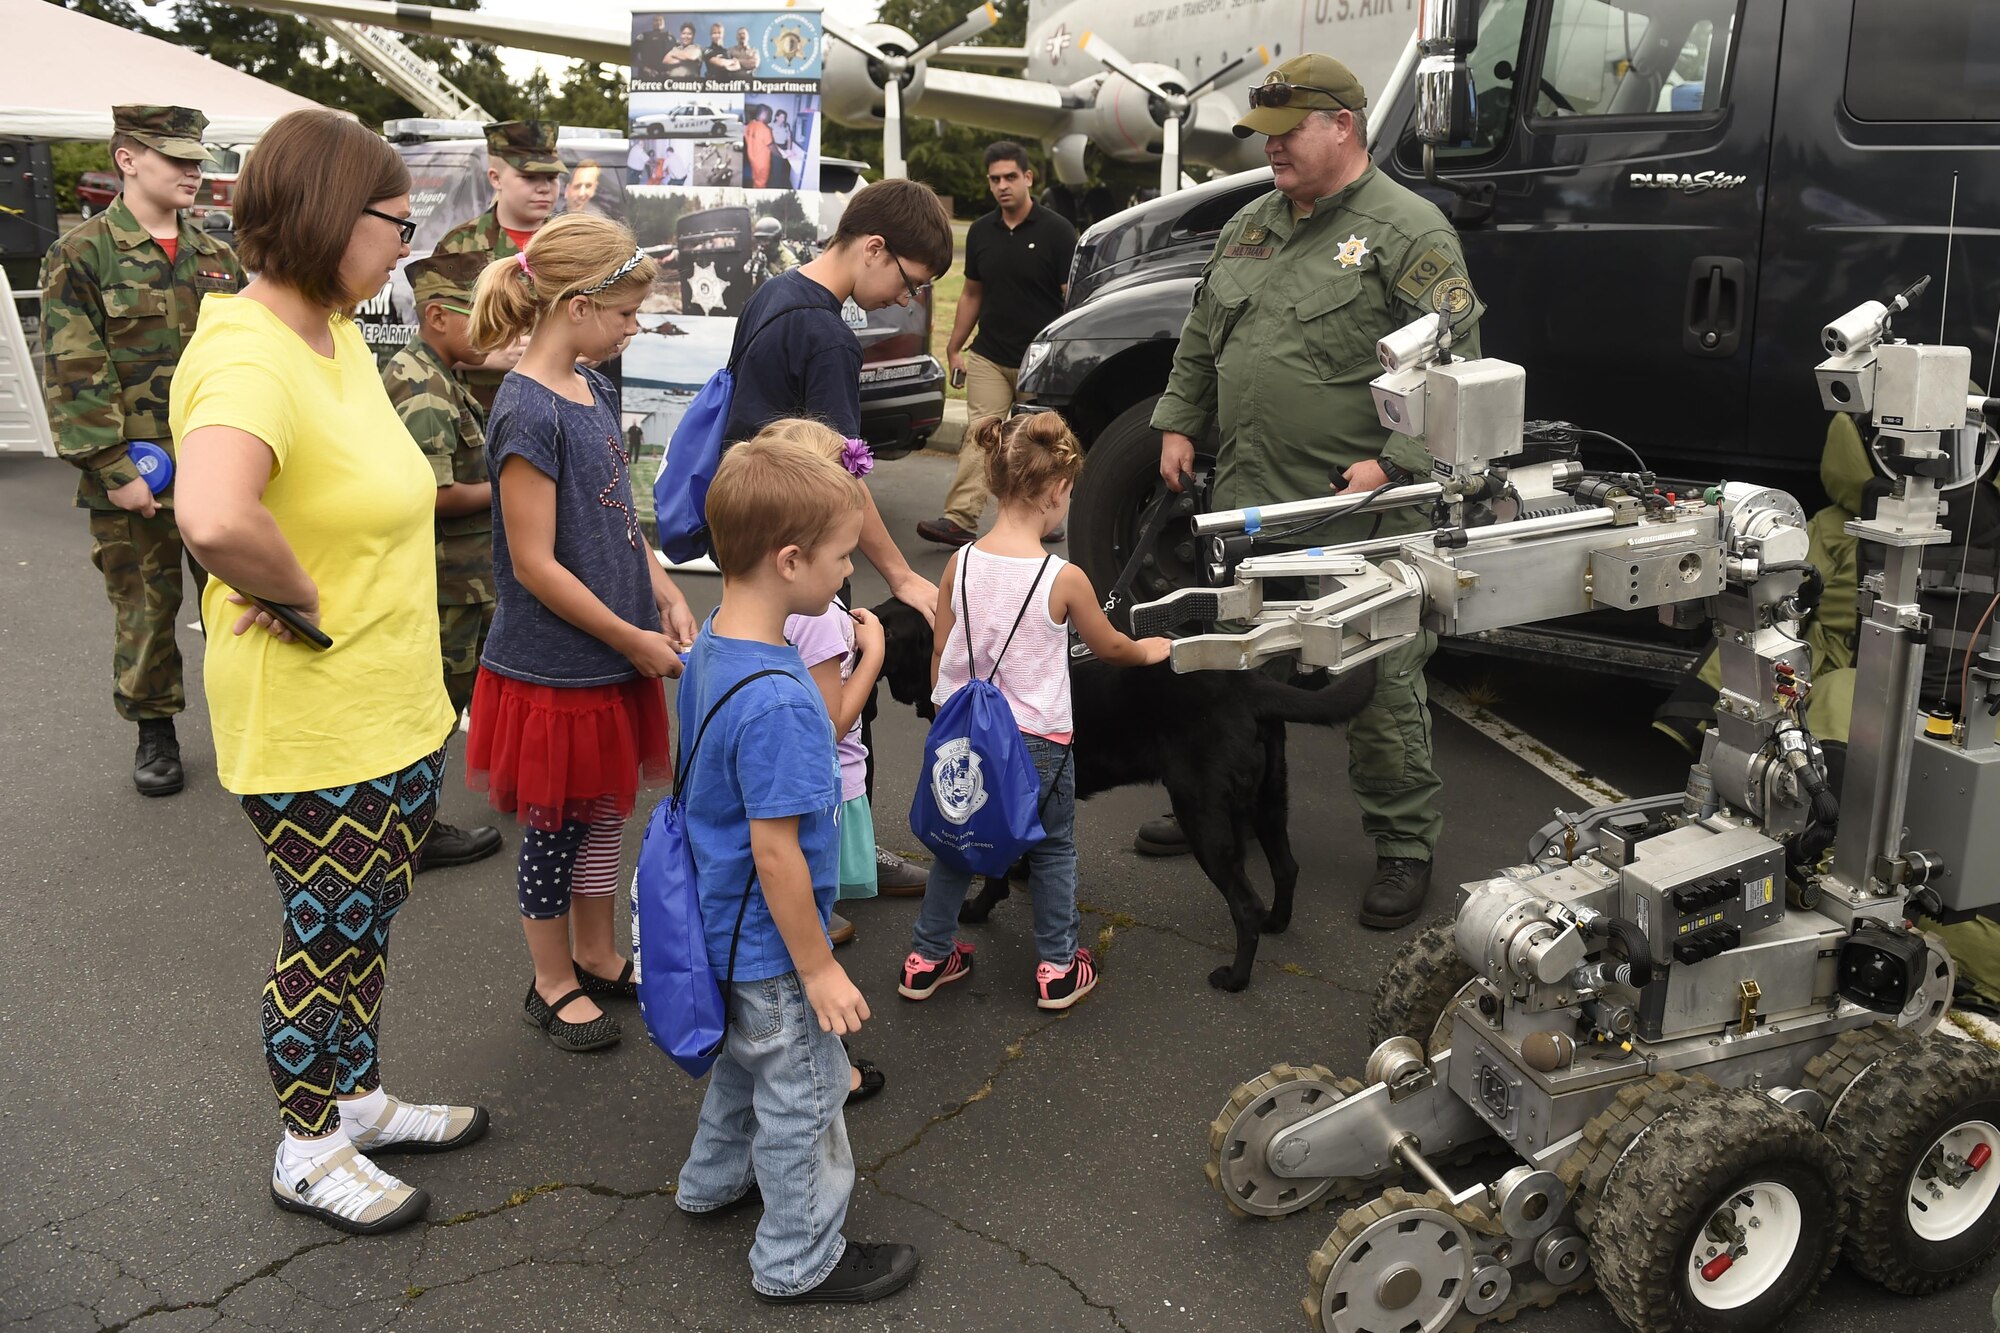 Visitors at the “Stand with Those Who Serve,” annual public safety appreciation event talk with members of the Pierce County Sheriff’s bomb squad July 23, 2016 at Joint Base Lewis-McChord, Wash. The event aimed to honor and bring together members of the area’s first responder community. (U.S. Air Force photo/Tech. Sgt. Tim Chacon) 